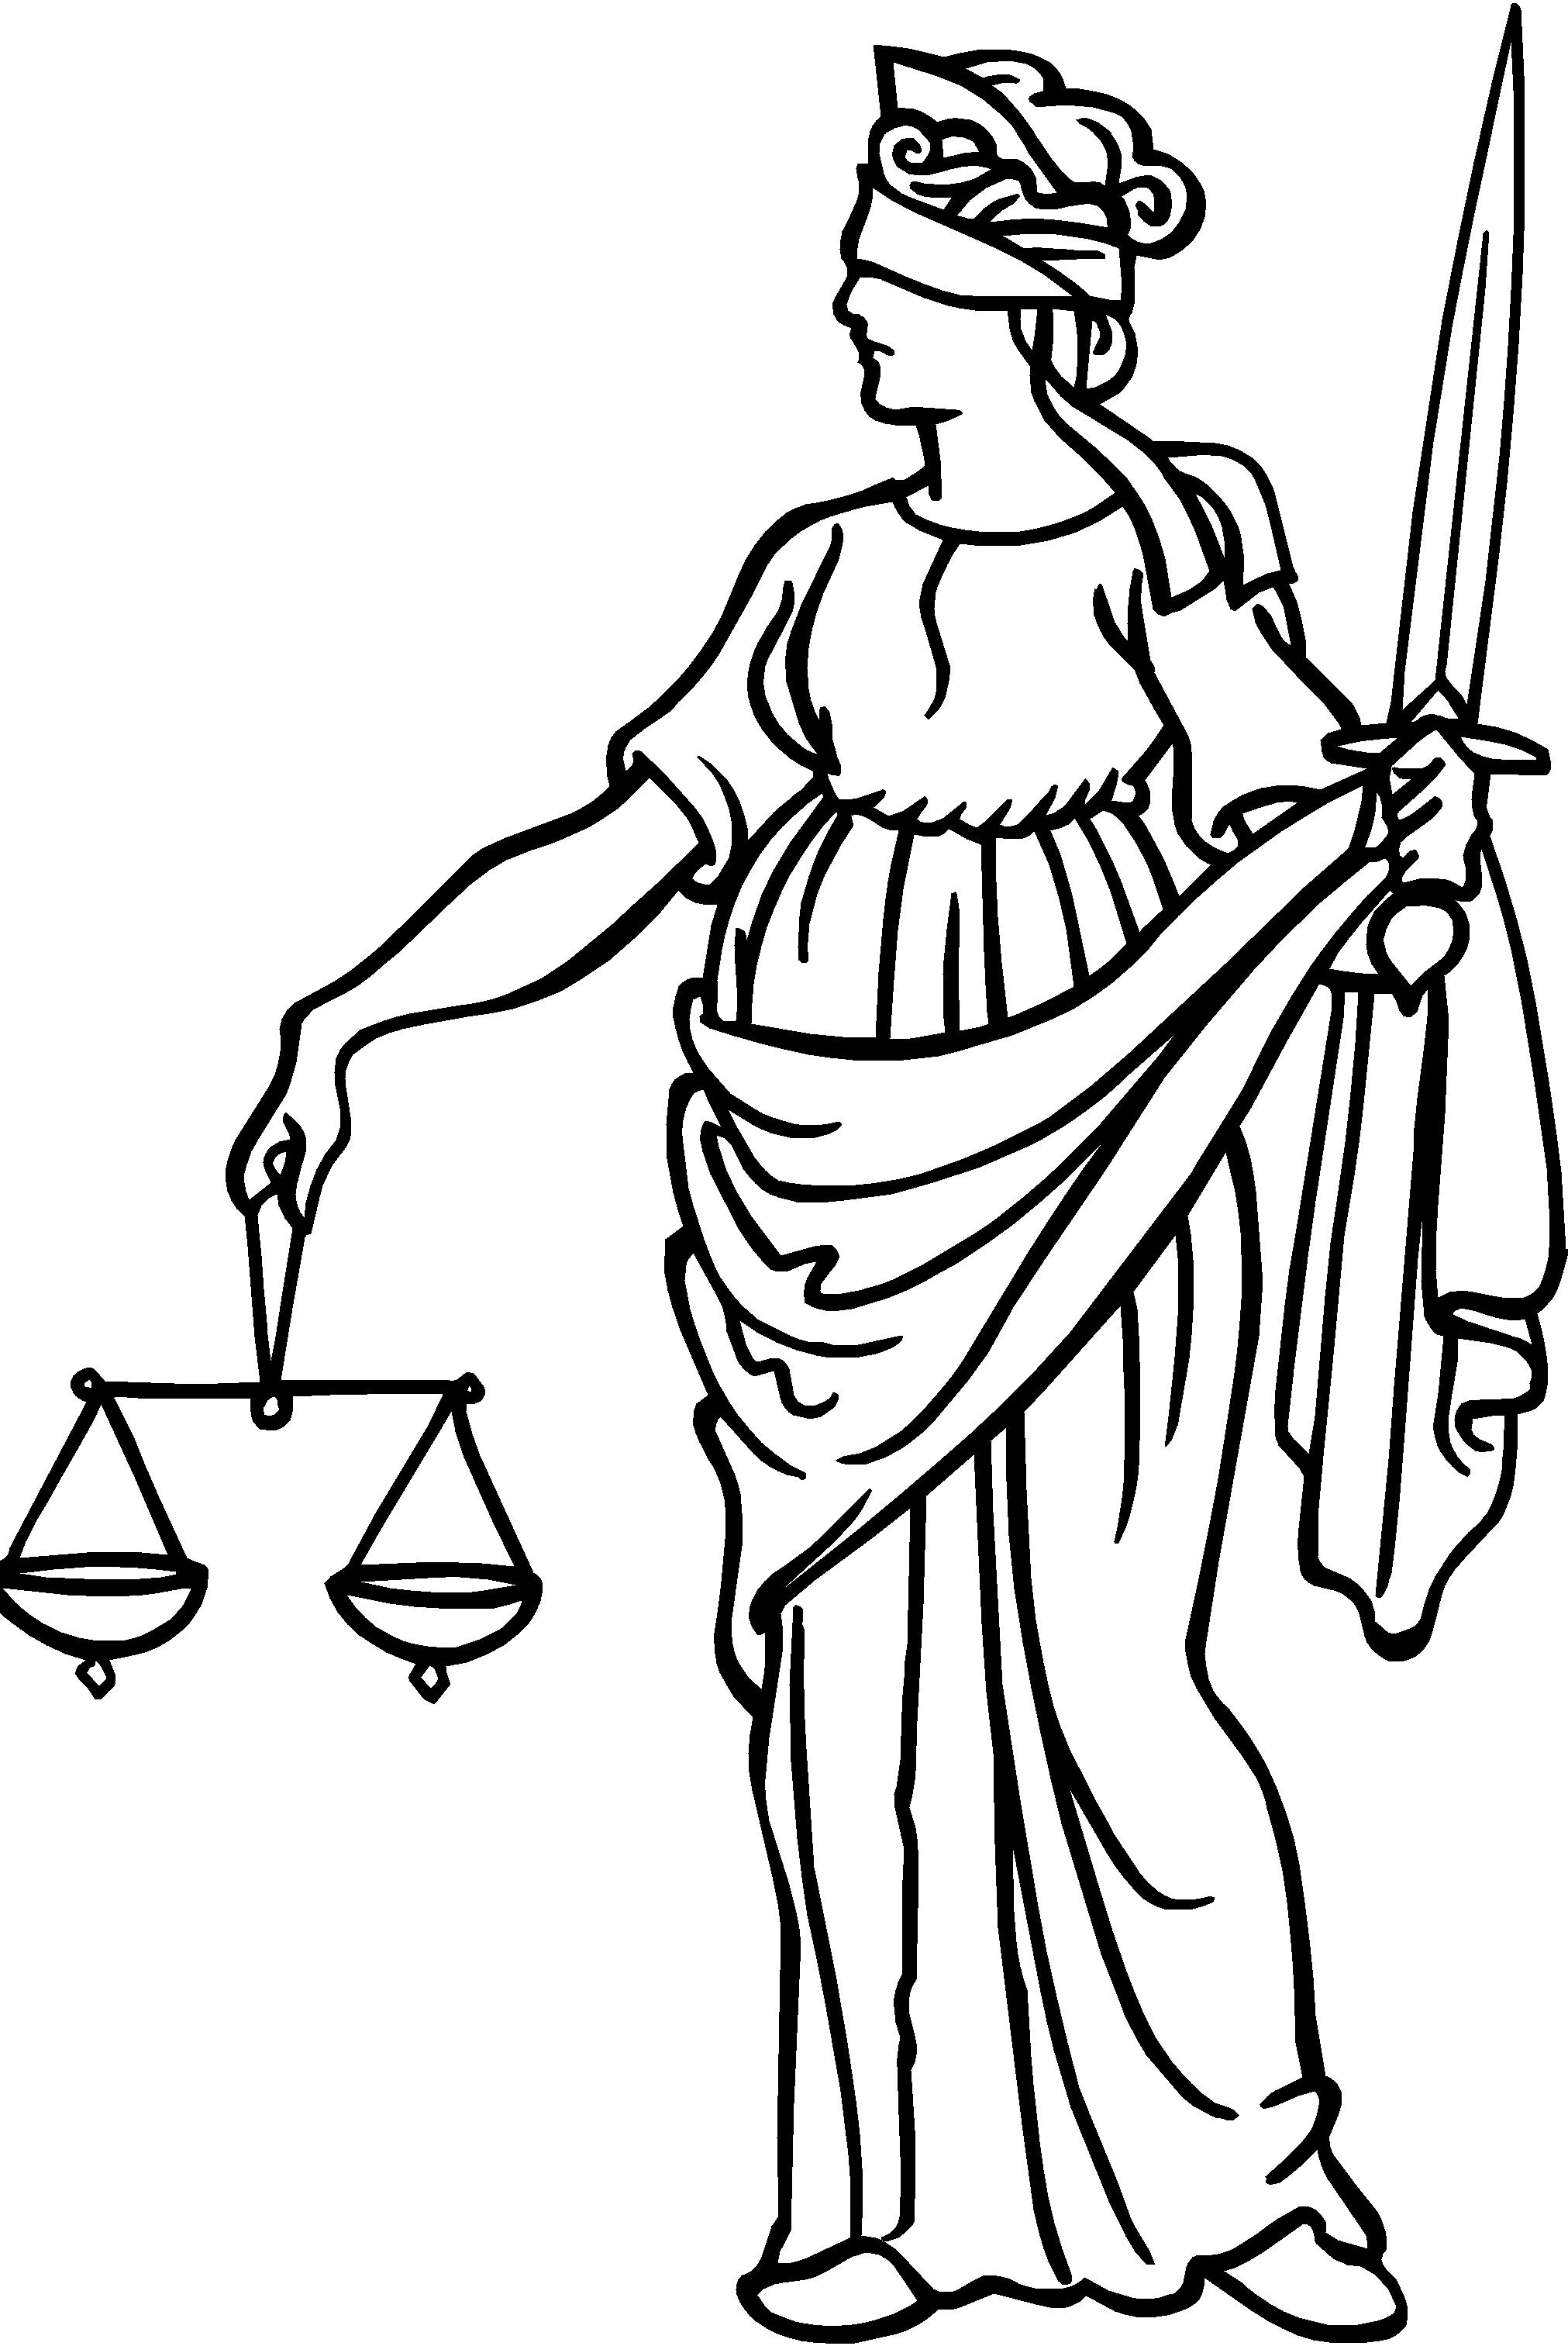 Lady Justice Clipart - ClipArt Best